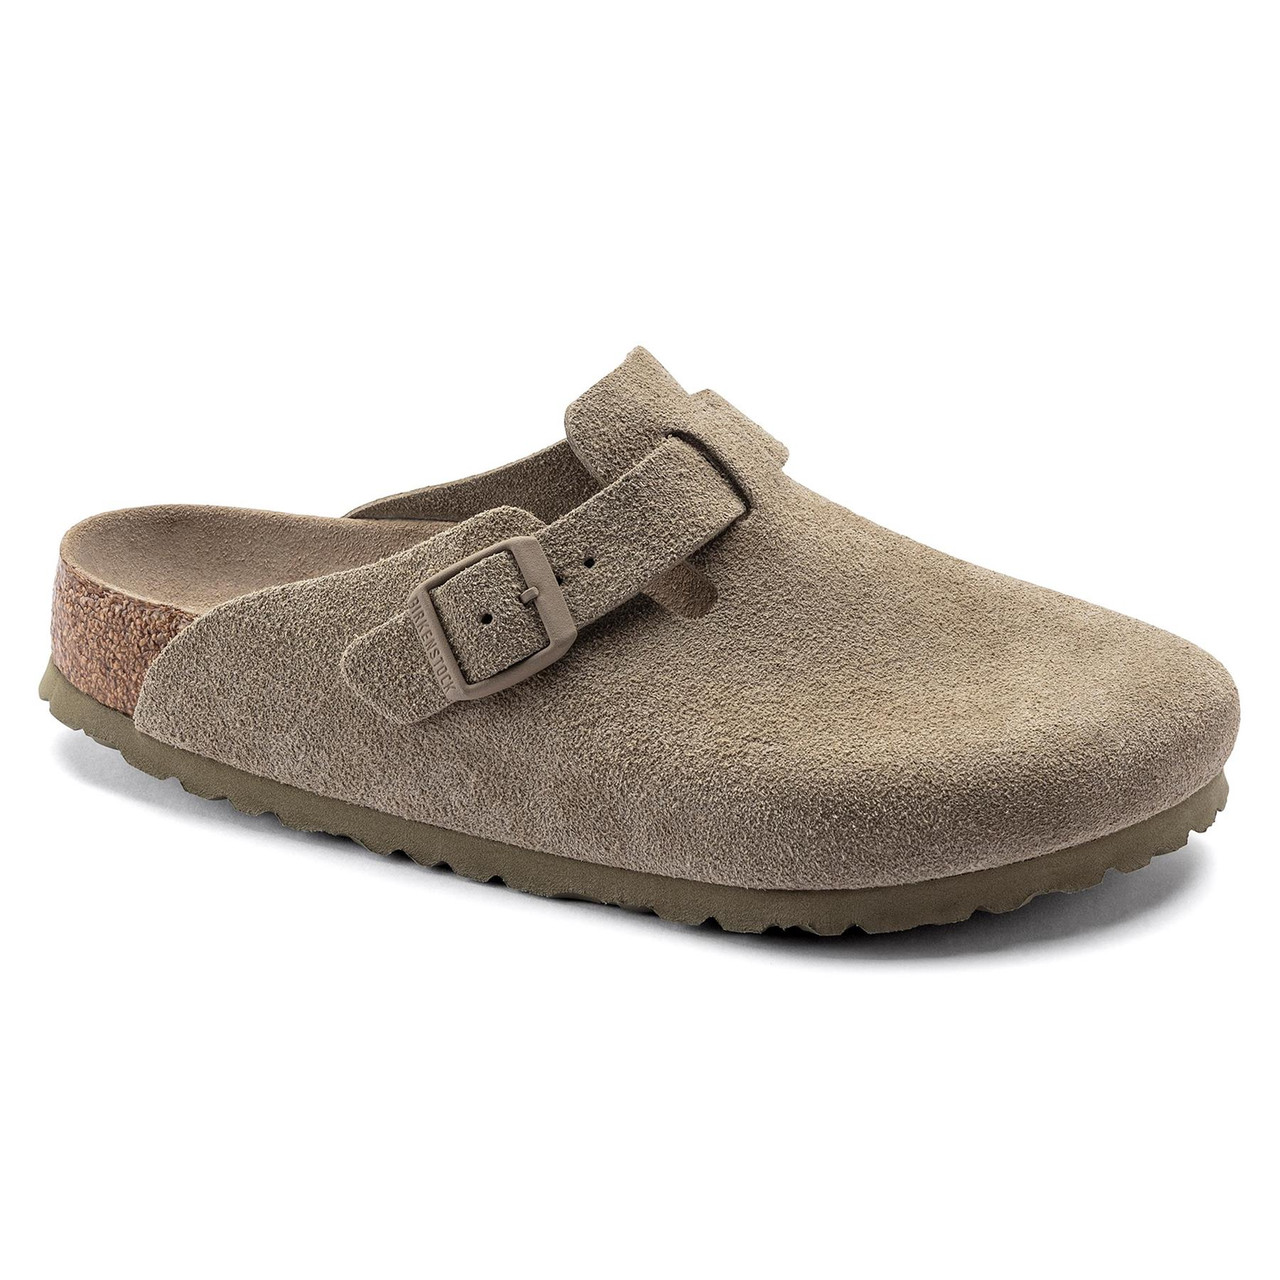 What are the characteristics of the Birkenstock Unisex Boston Soft Footbed Suede Leather clogs?